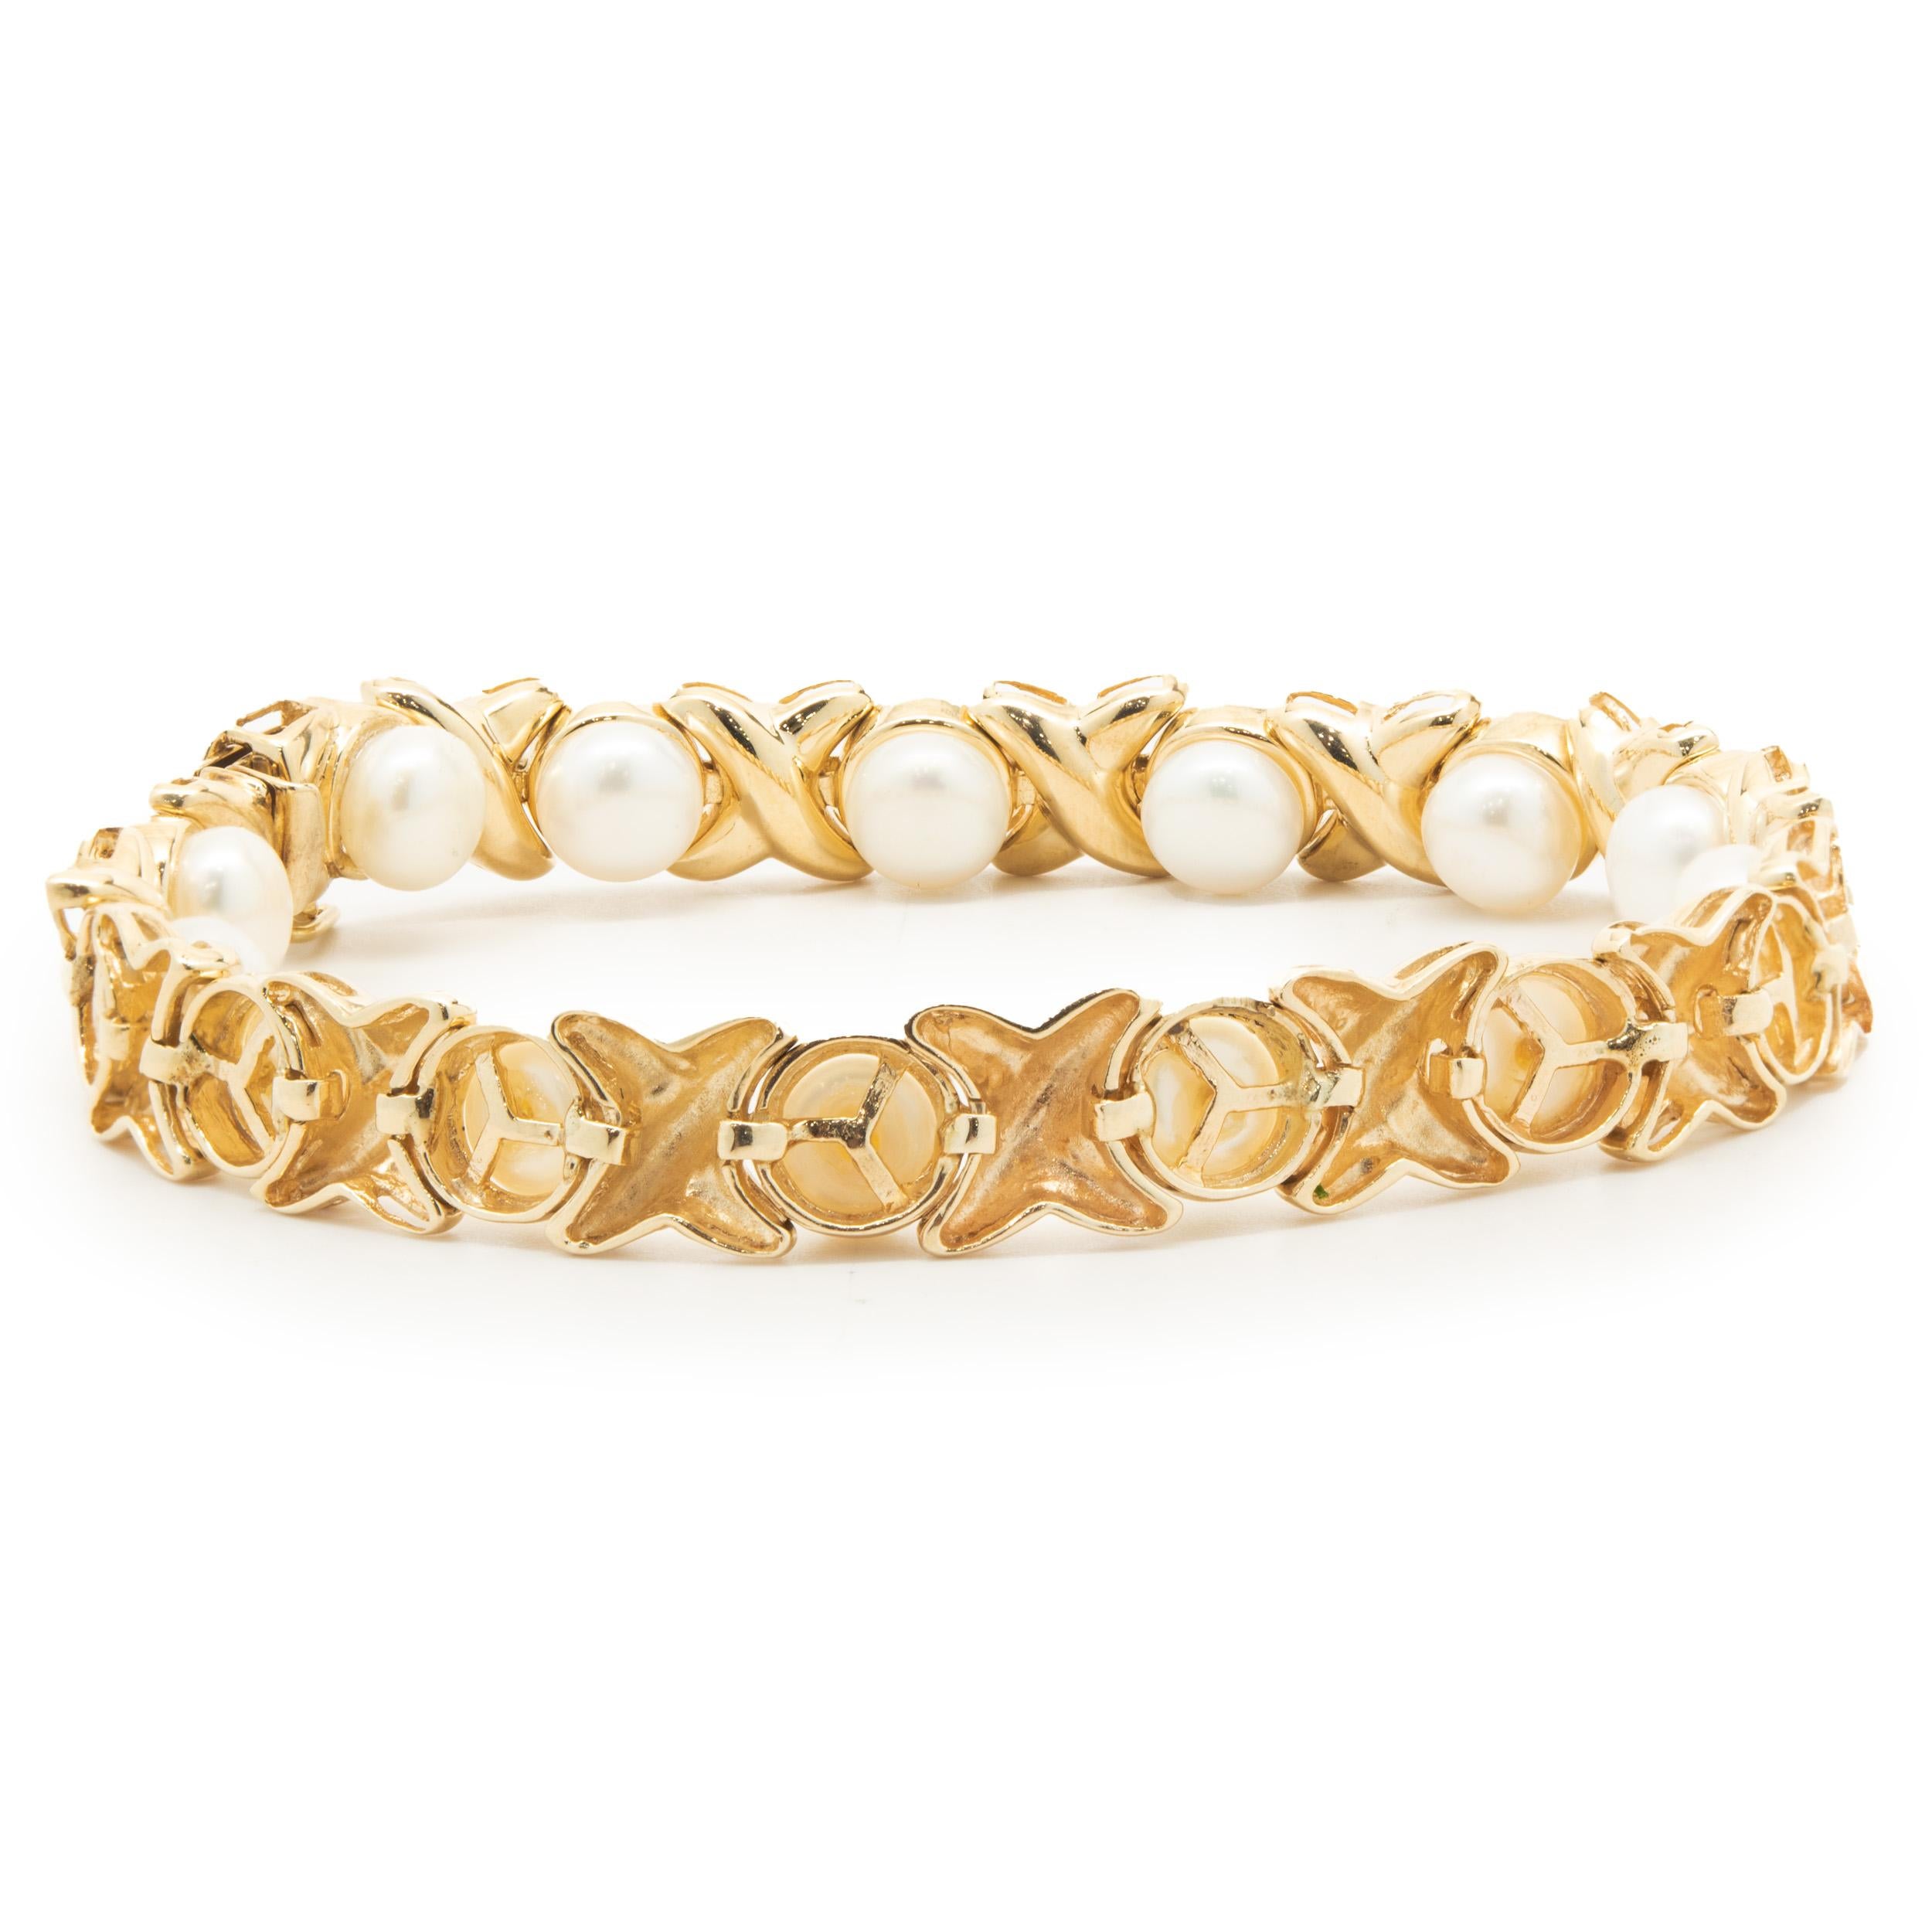 Designer: custom
Material: 14K yellow gold
Weight: 21.30 grams
Dimensions: bracelet will fit up to a 7.5-inch wrist
